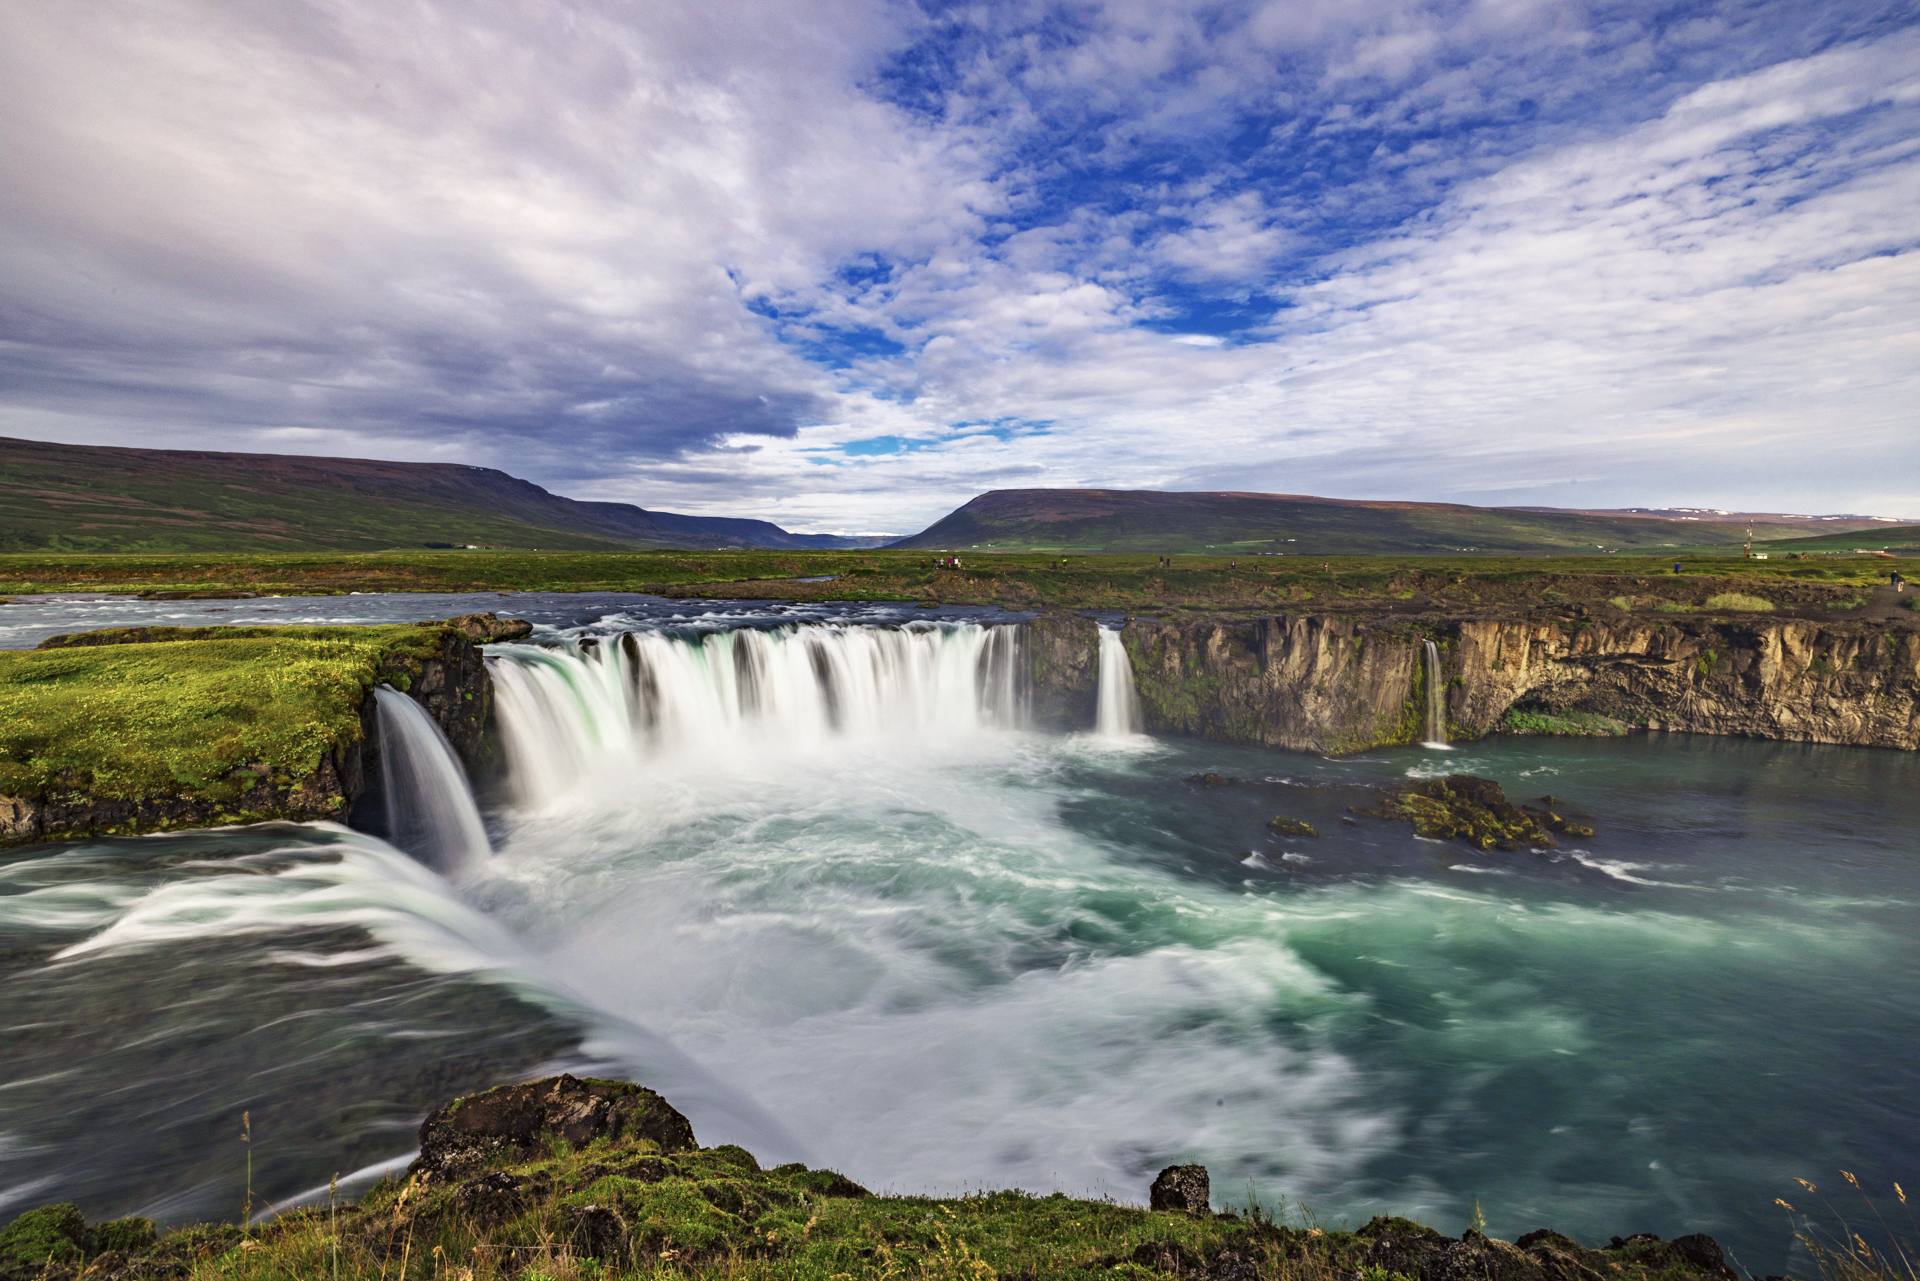 Marvel at Goðafoss waterfall in North Iceland, one of the most spectacular in the country